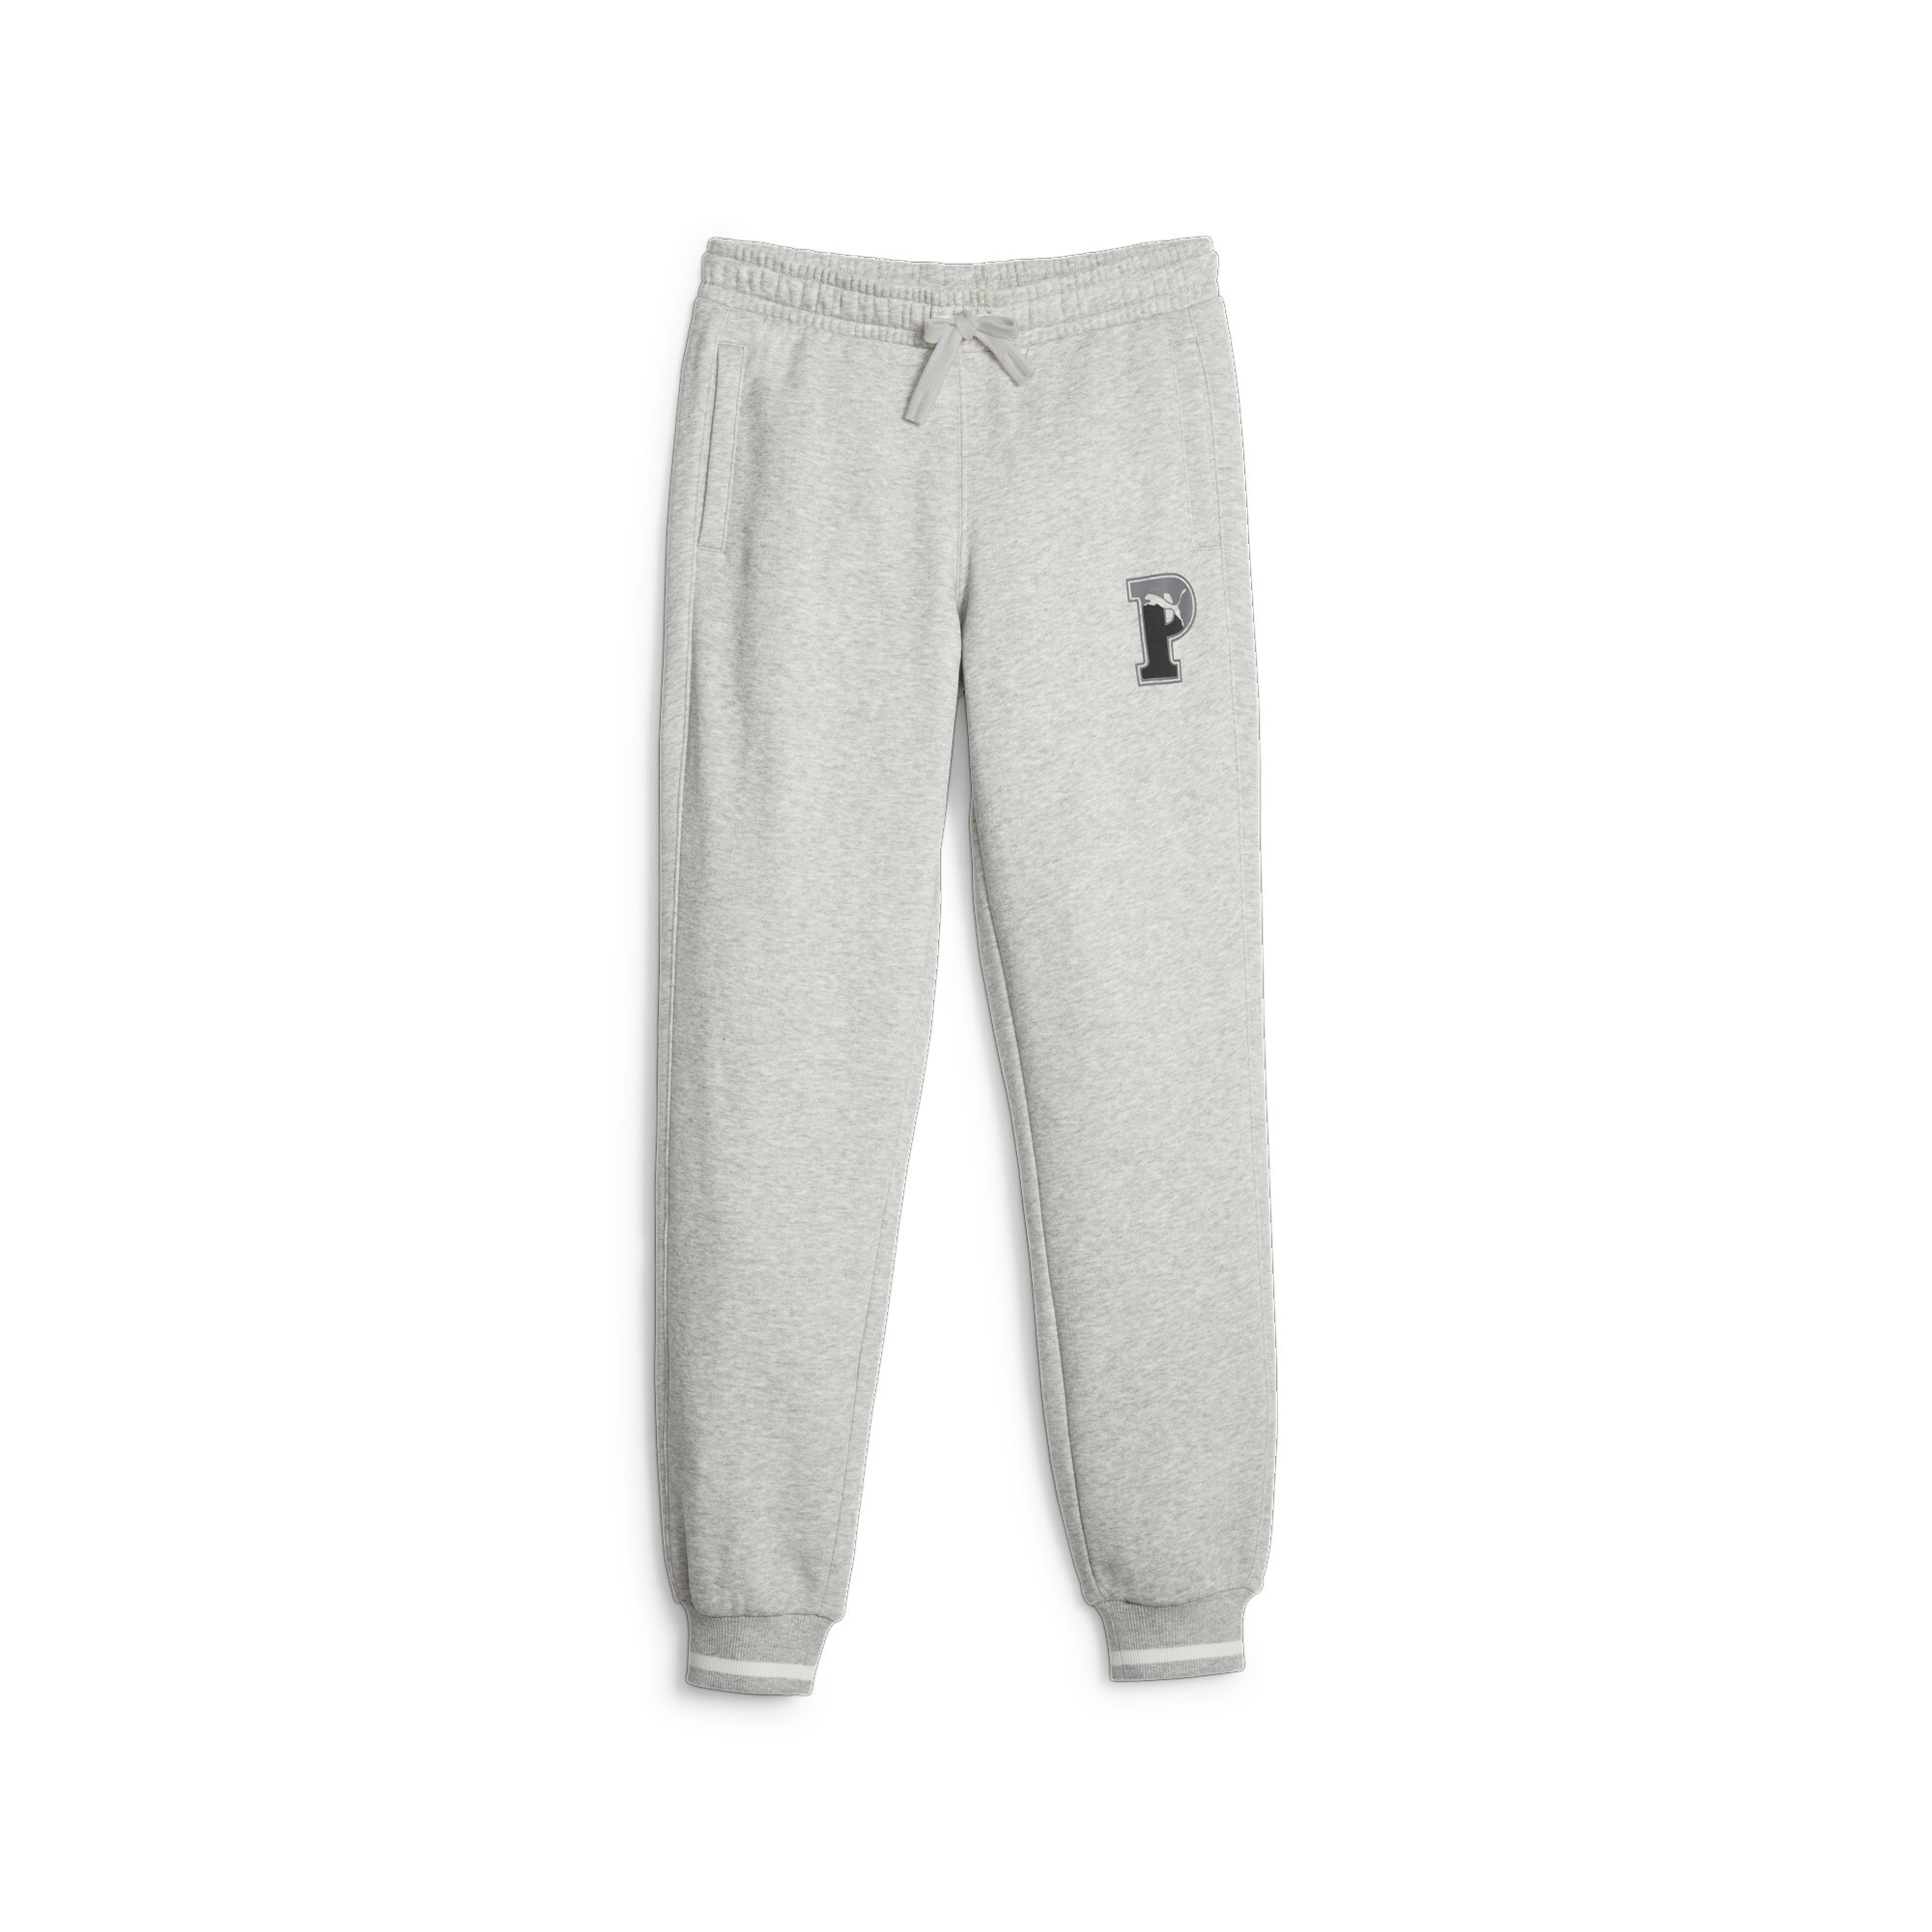 PUMA SQUAD Sweatpants In Heather, Size 7-8 Youth